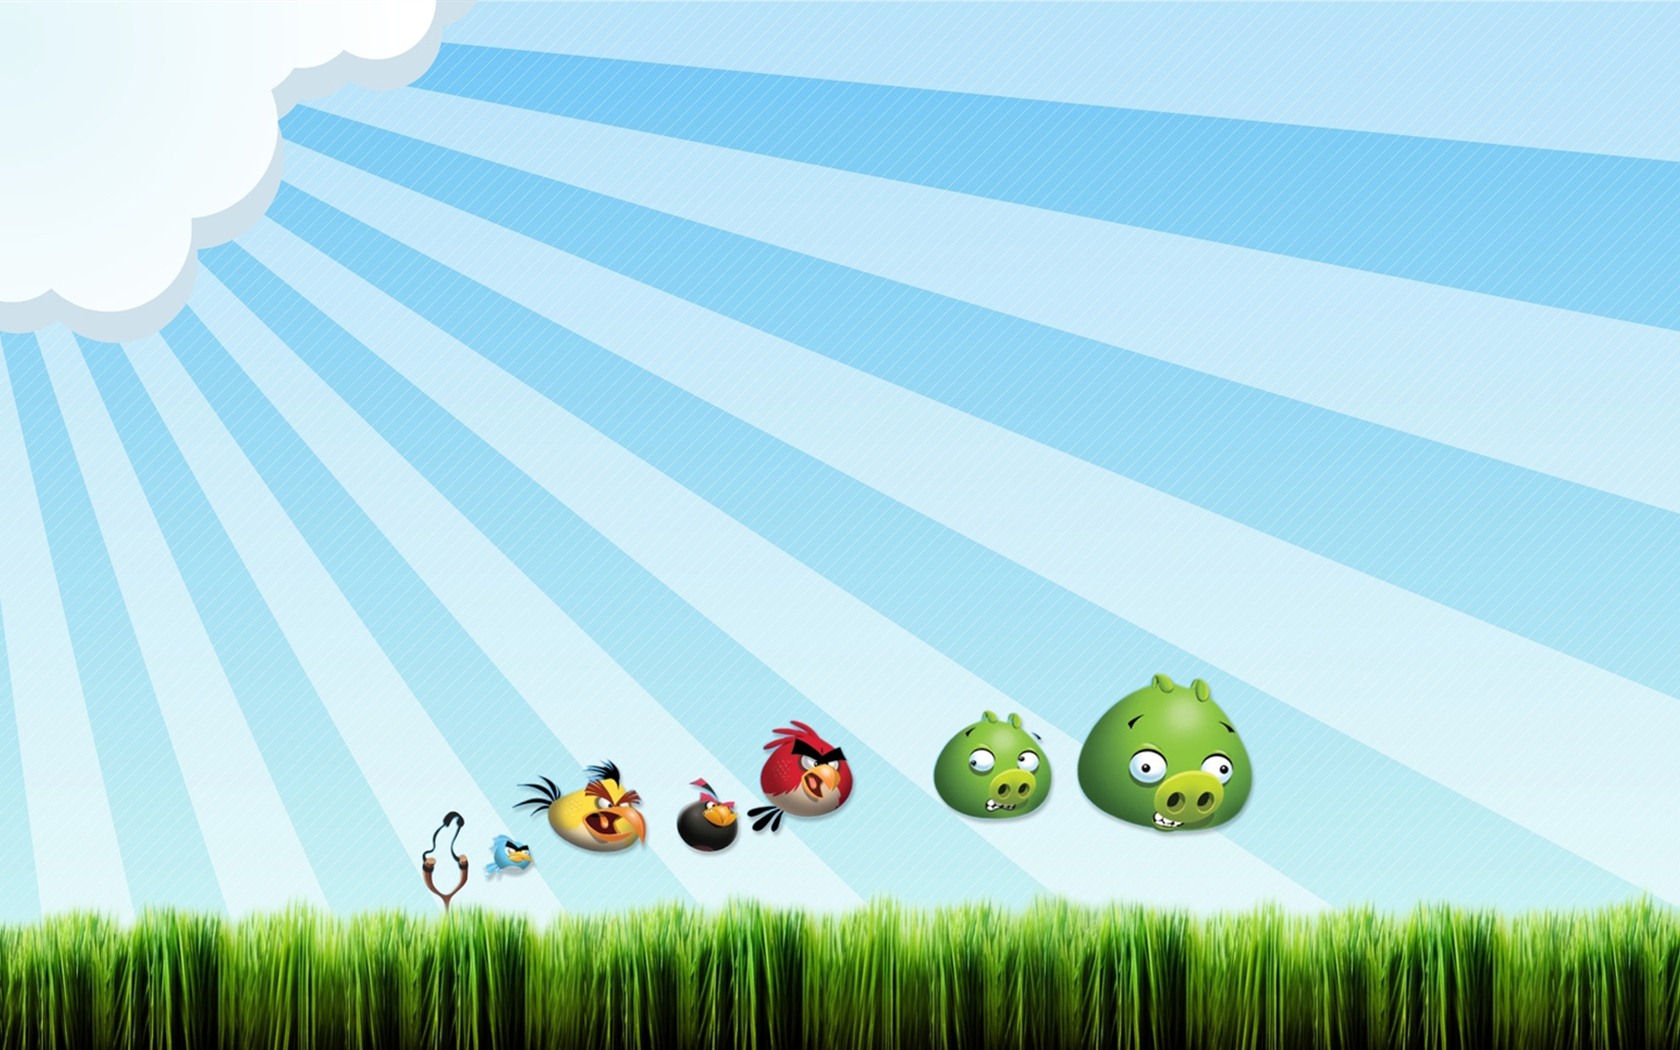 Angry Birds Game Wallpapers #4 - 1680x1050